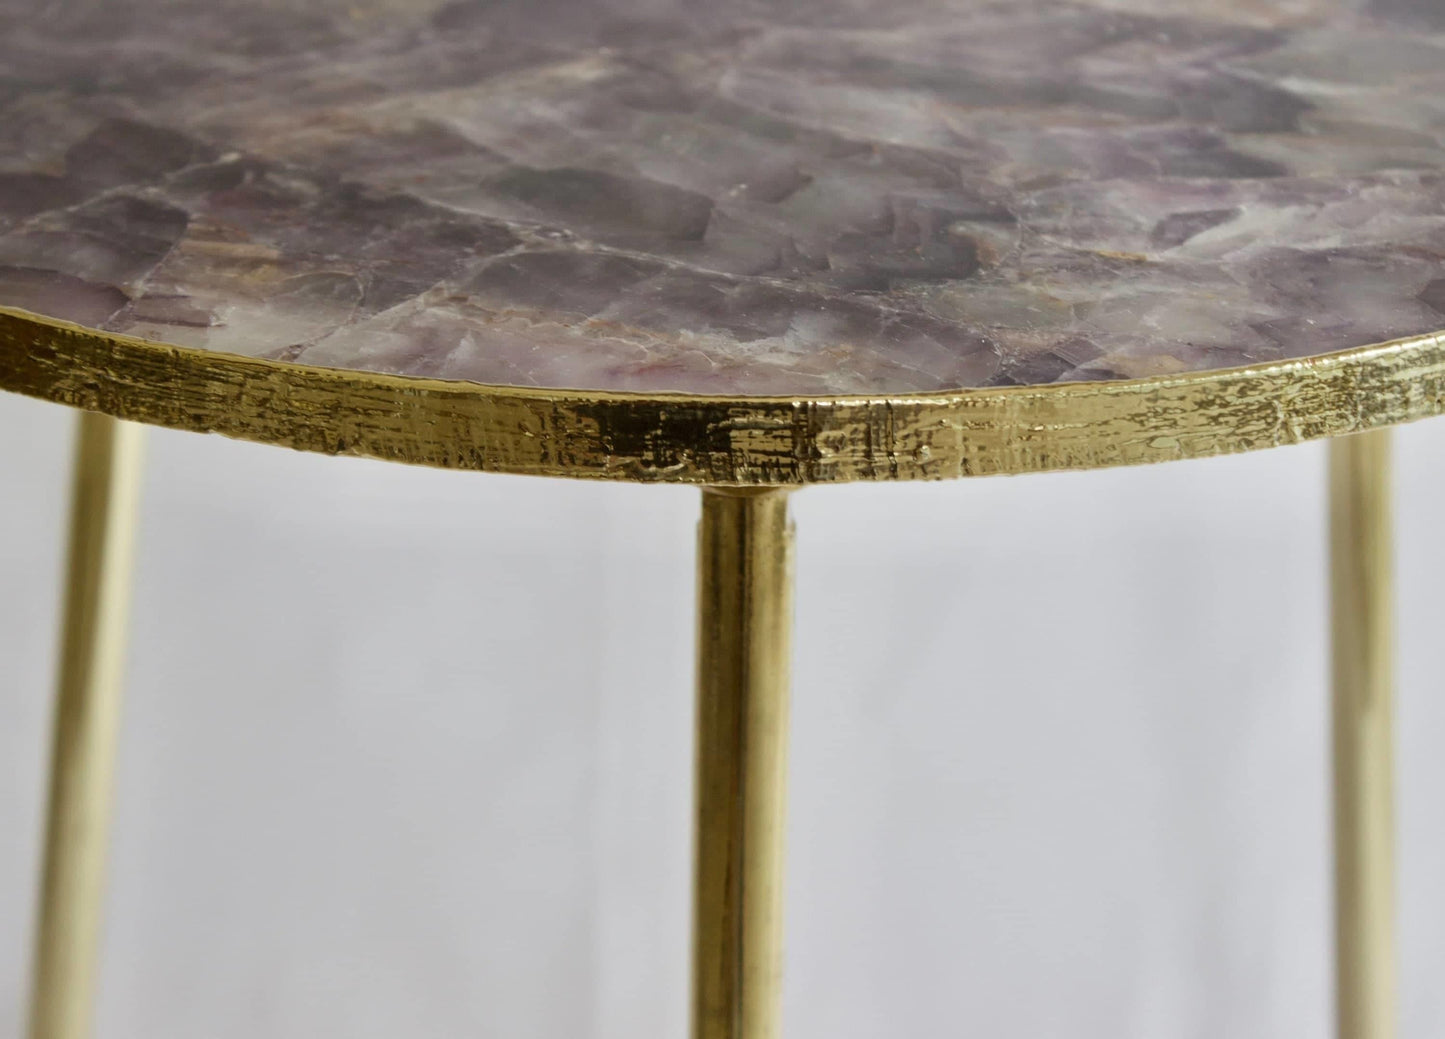 Amethyst Round Coffee Side Table - MAIA HOMES